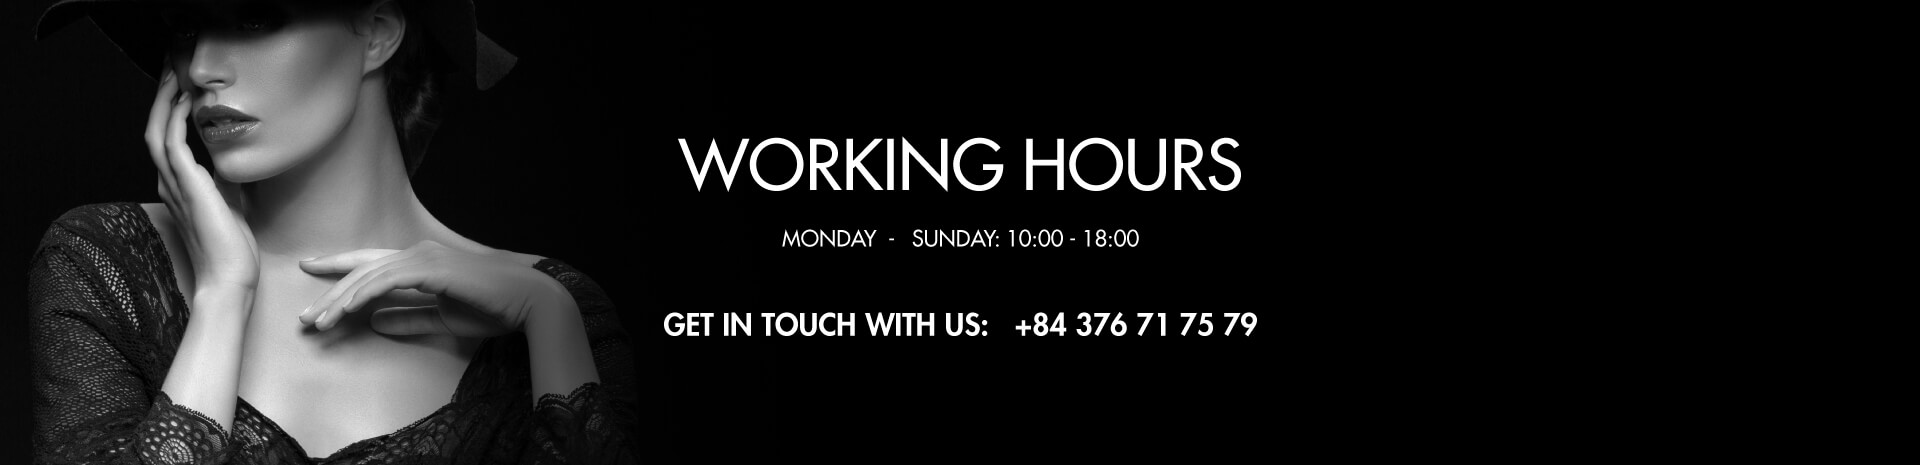 Sian Clinic Working Hours